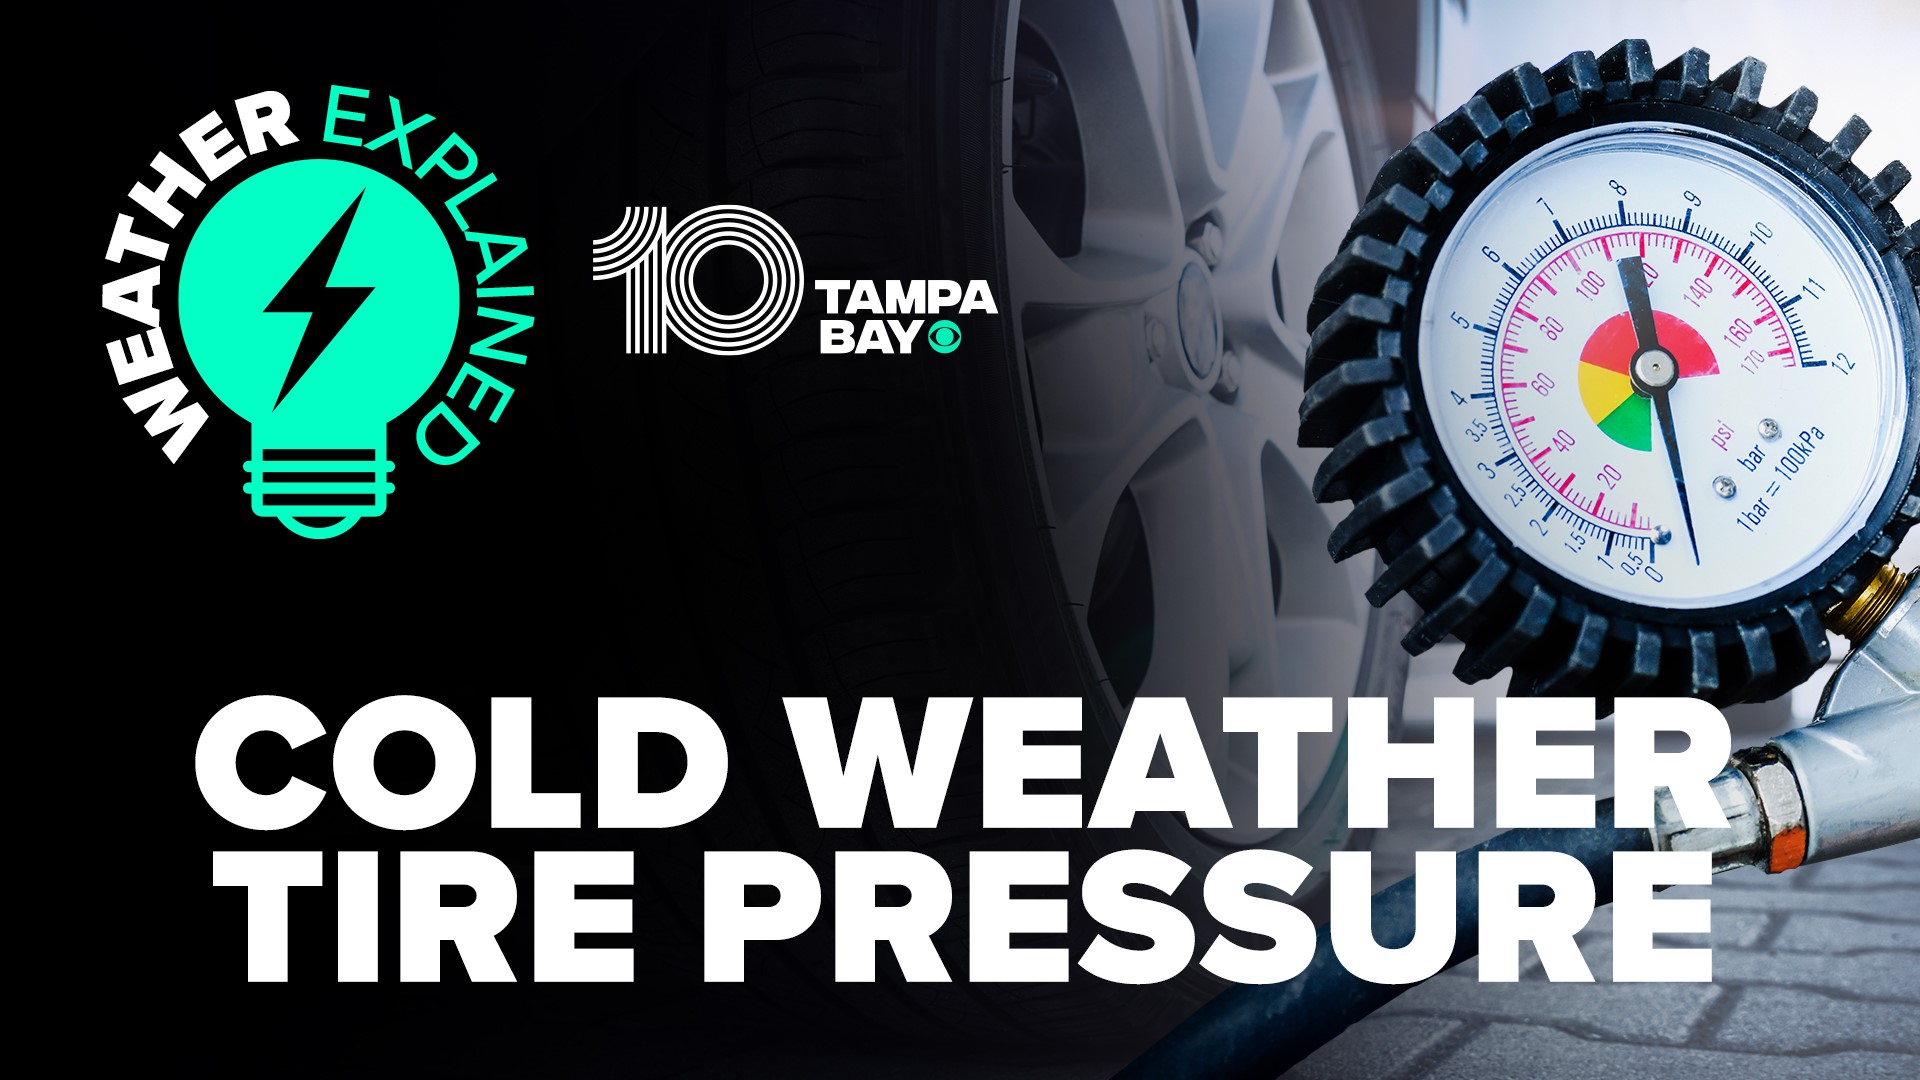 10 Tampa Bay meteorologist Grant Gilmore explains temperature has a direct relationship with air pressure.